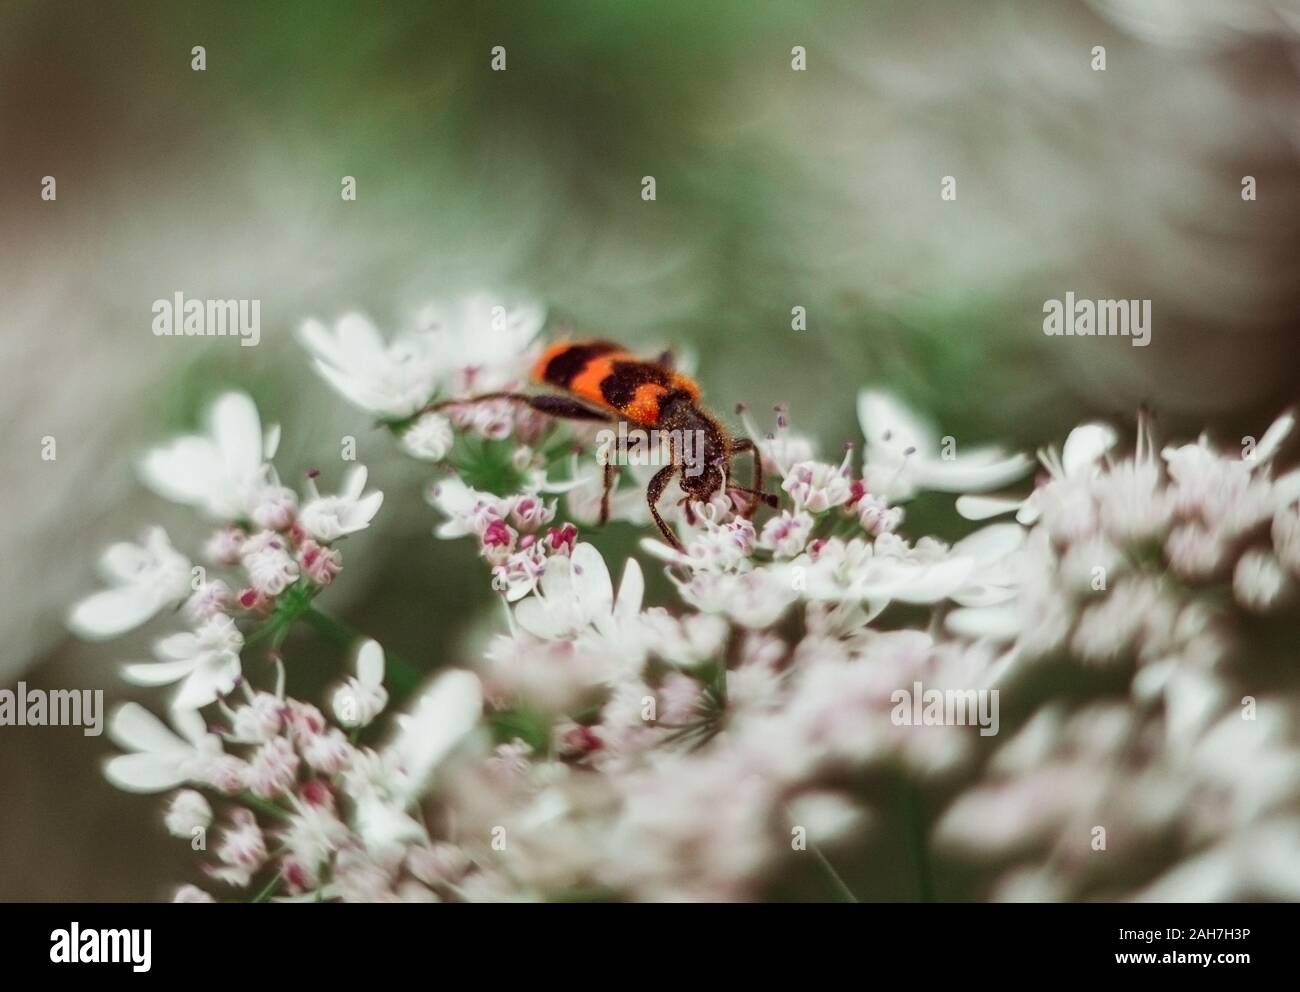 A red black striped fluffy beetle sits on a white flower on a green blurred background. Trichodes or bee beetle. Poisonous plant dog-parsley. Stock Photo